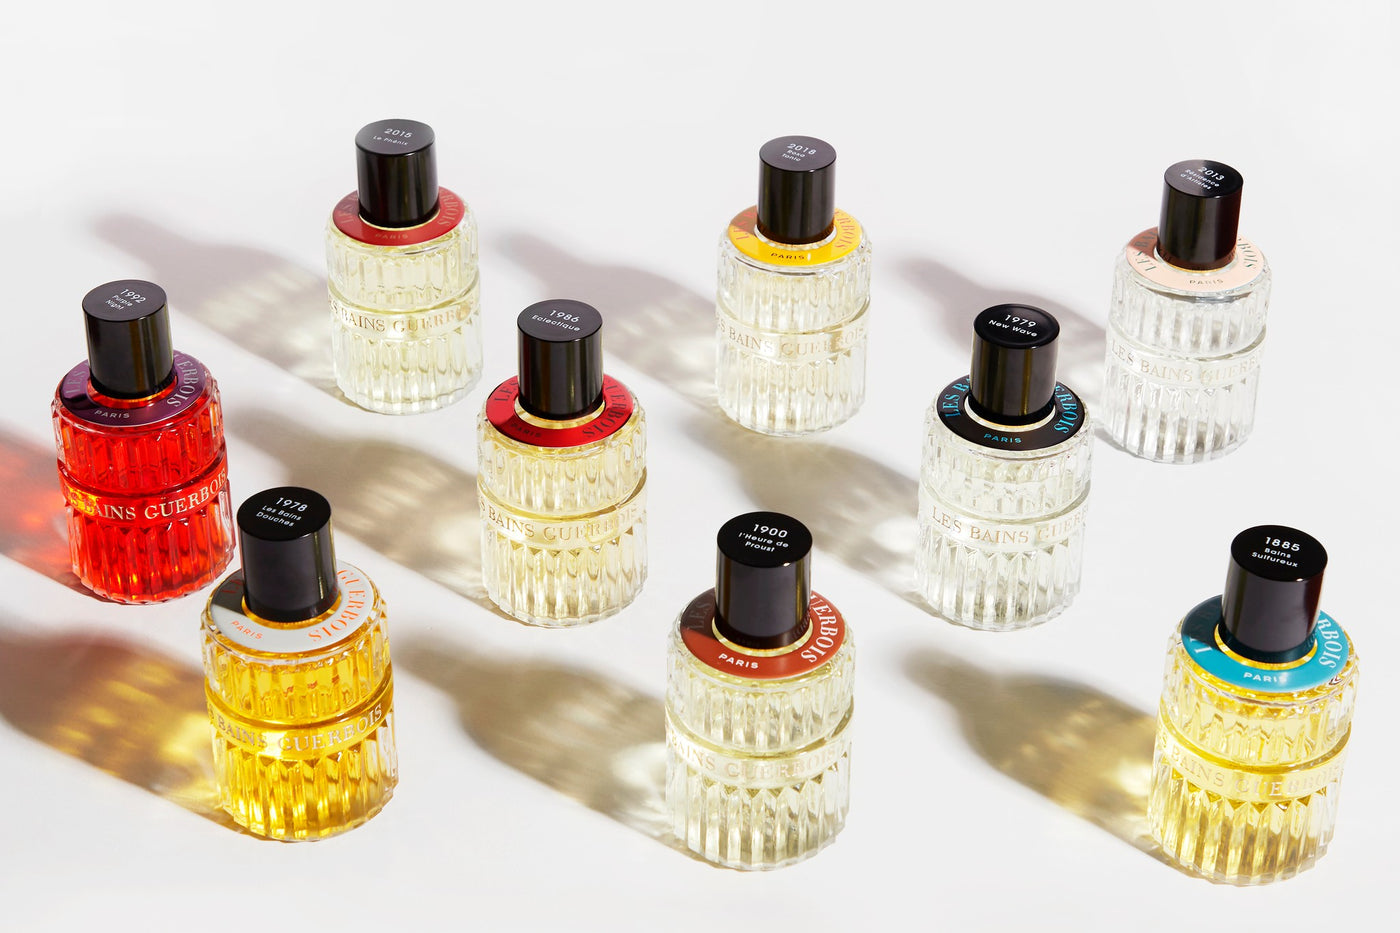 Six Les Bains Guerbois ridged clear glass perfume bottles with black caps on a pale grey surface and background.